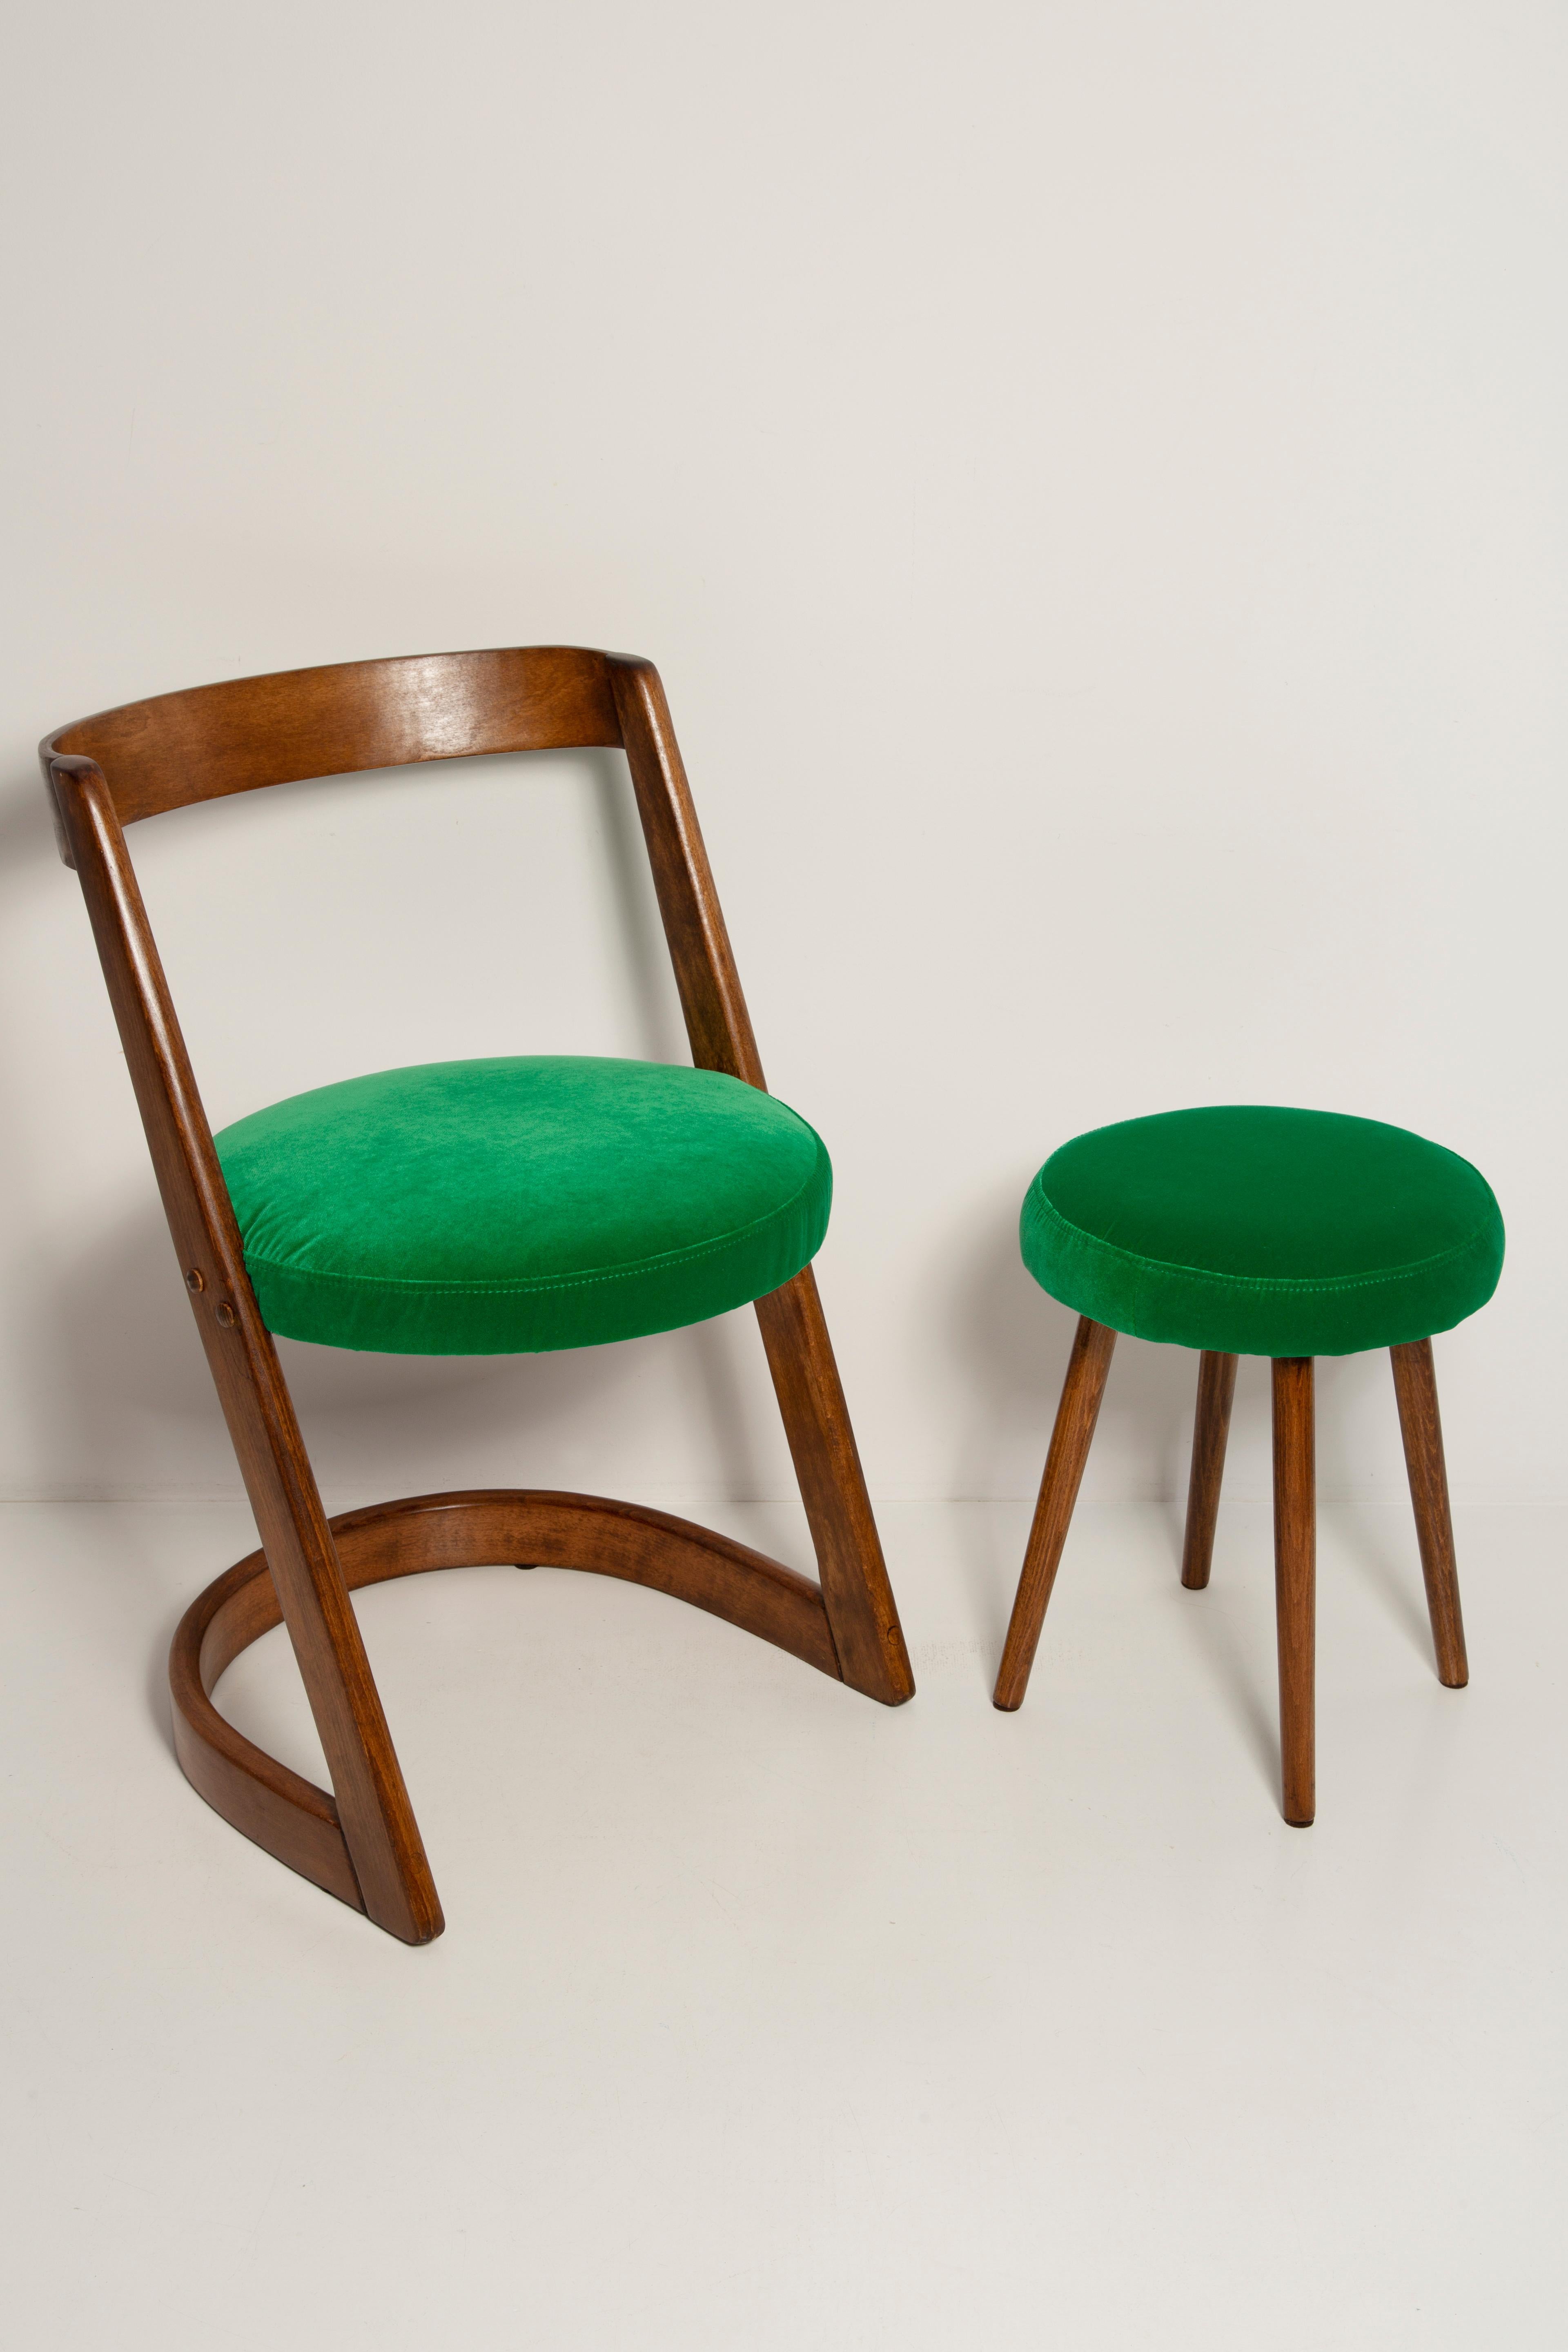 Halfa chair designed by Baumann in the 1970s. 
In the catalogue of the avant-garde collection.
Made from 5 pieces of Doubs beech.

Made of beechwood. Chair is after a complete upholstery renovation, the woodwork has been refreshed. Seat is